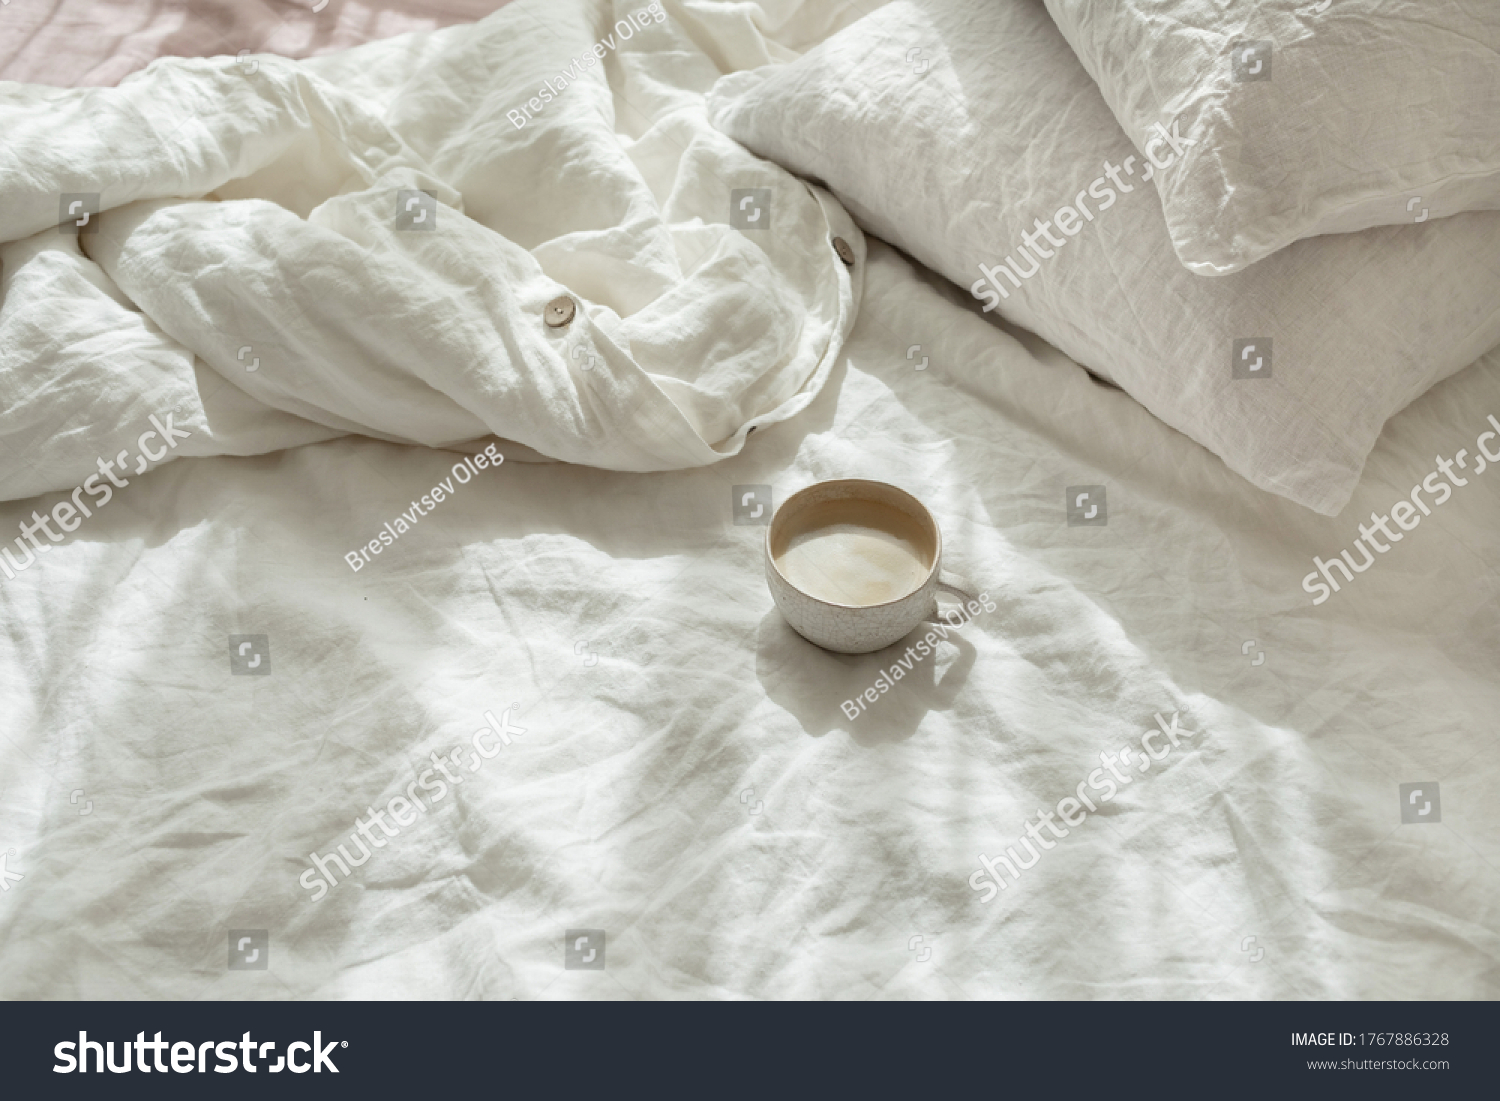 Cup of fresh coffee in bed, morning mood. Linen cotton textile bedclothes. Organic and natural linen. Cozy bedroom interior. Beautiful light. #1767886328